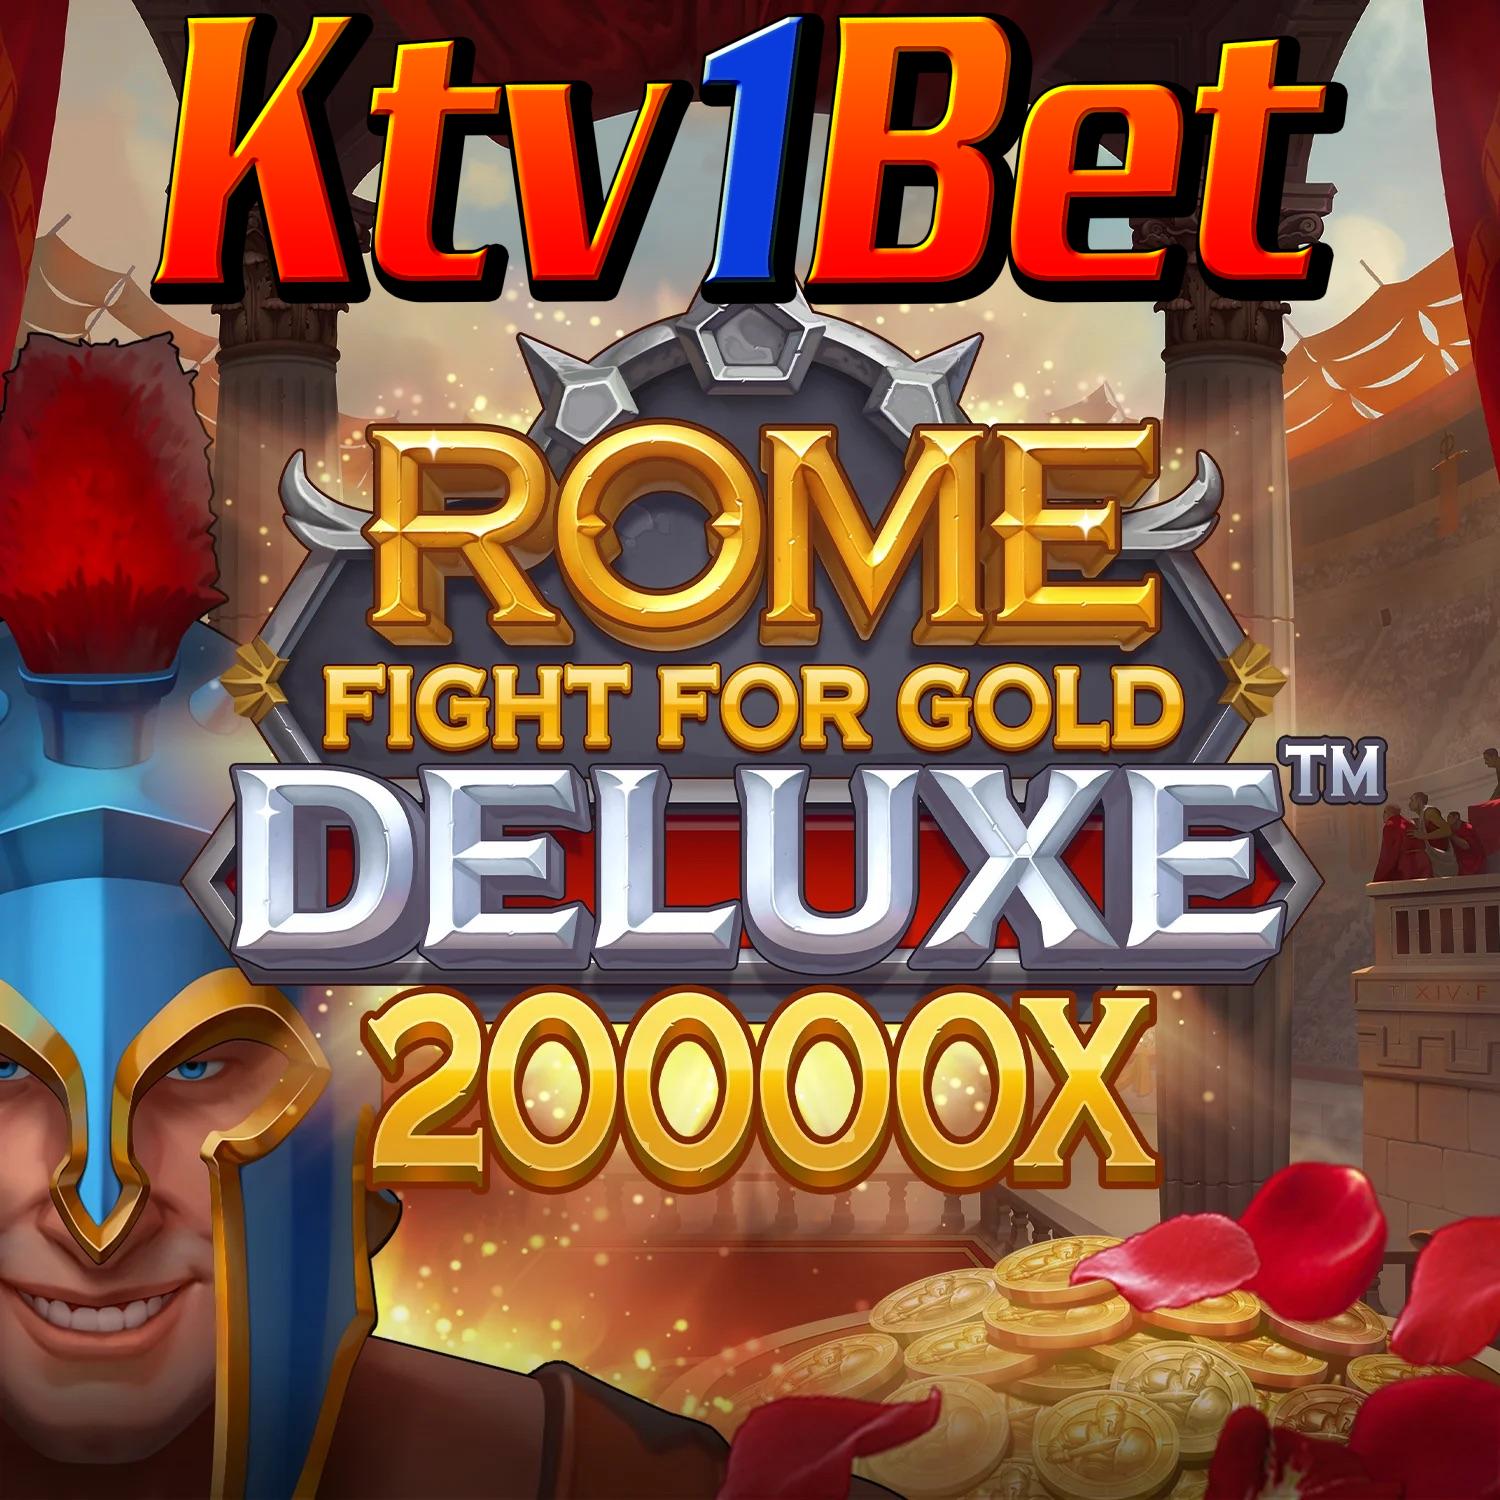 Rome- Fight For Gold Deluxe